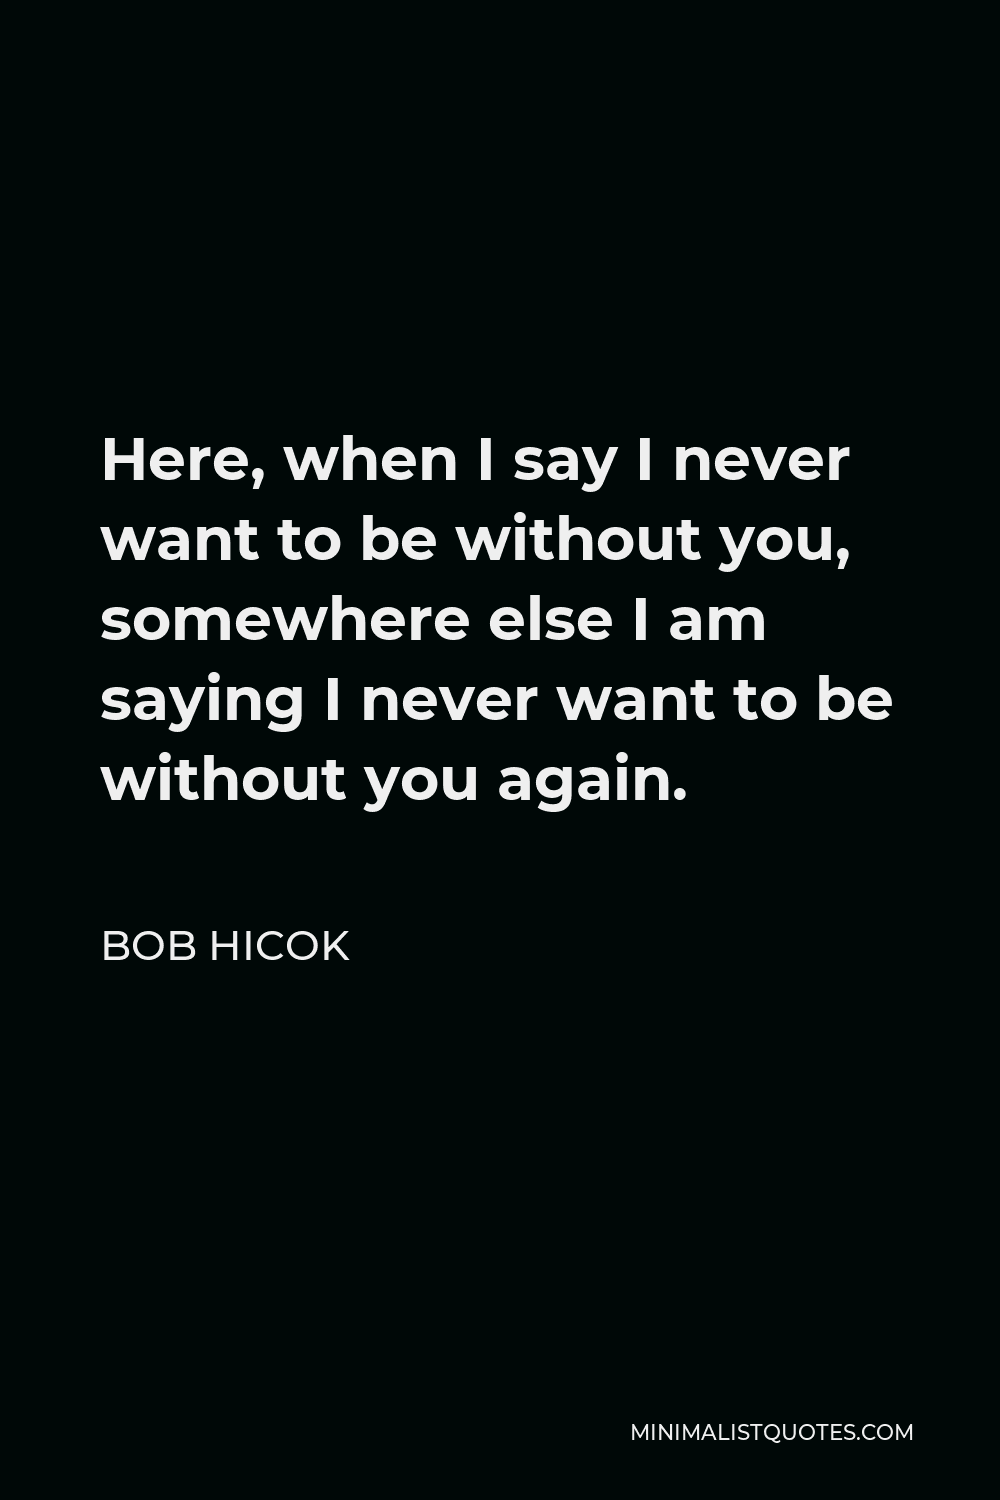 Bob Hicok Quote - Here, when I say I never want to be without you, somewhere else I am saying I never want to be without you again.